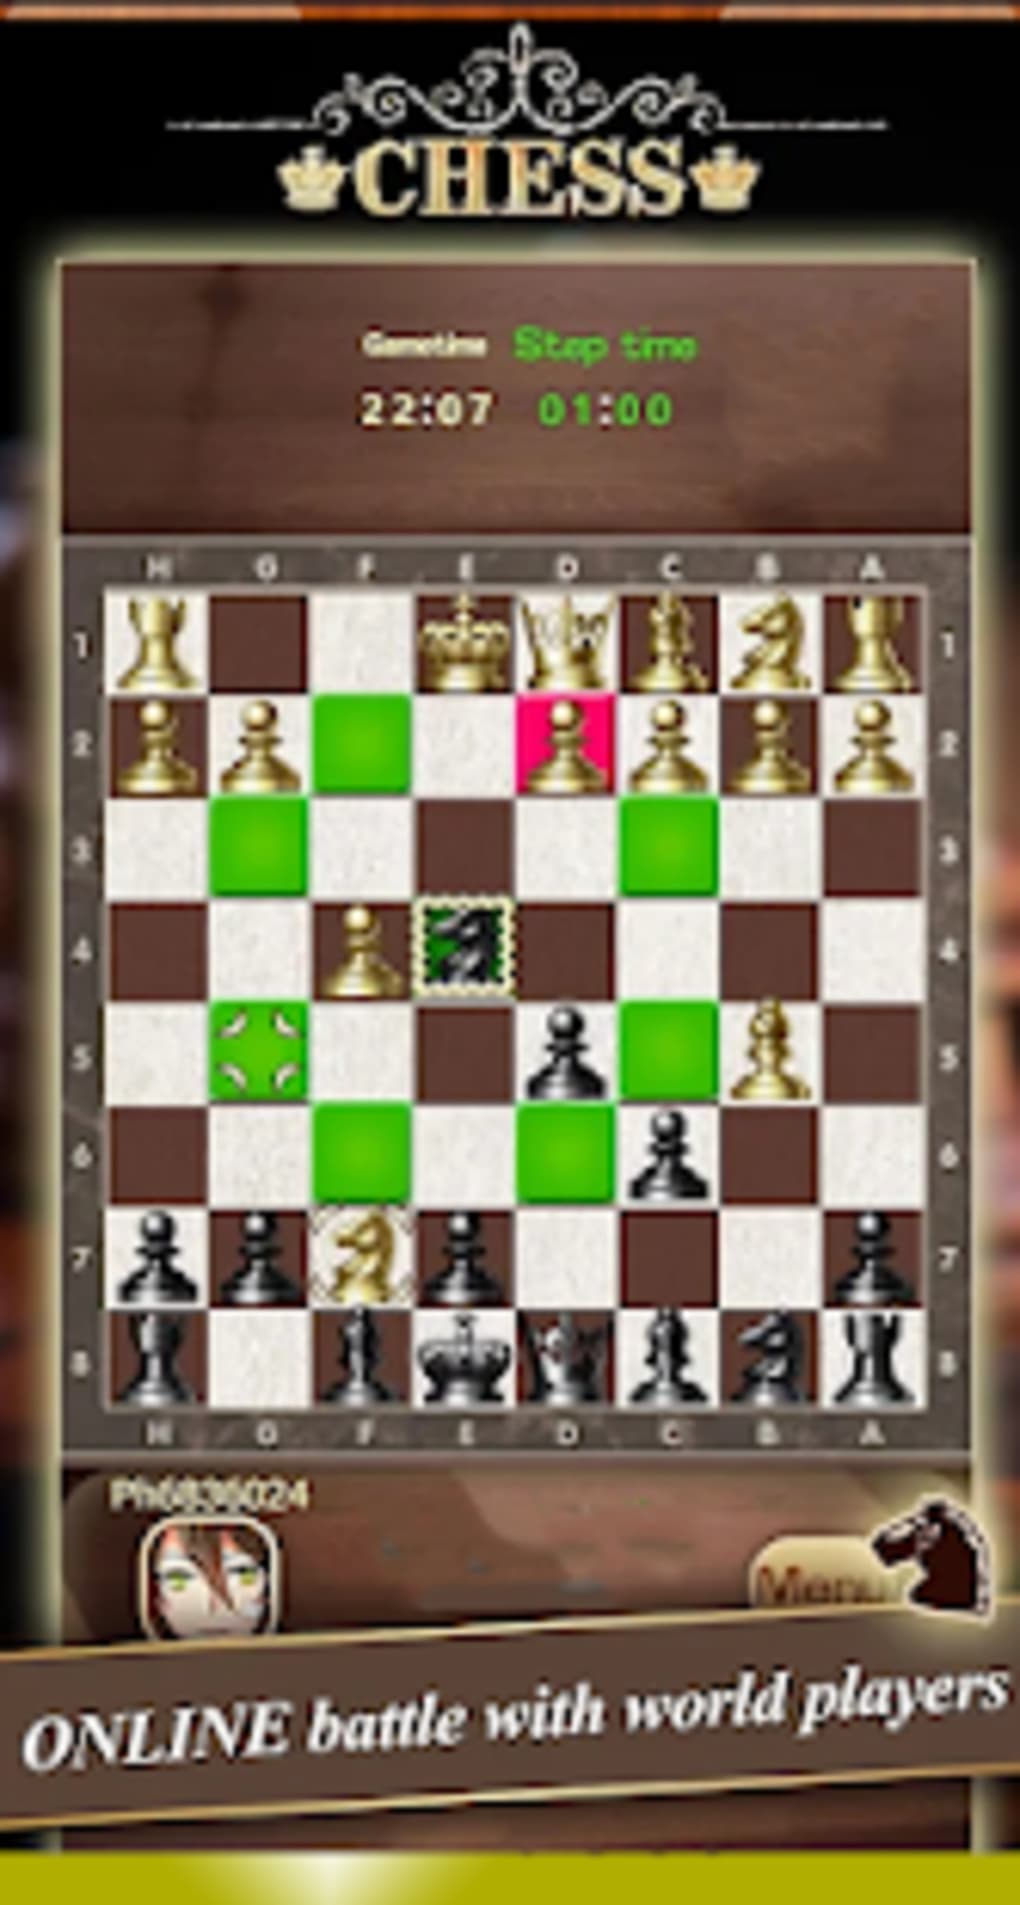 Chess Free 2019 - Master Chess- Play Chess Offline APK für Android